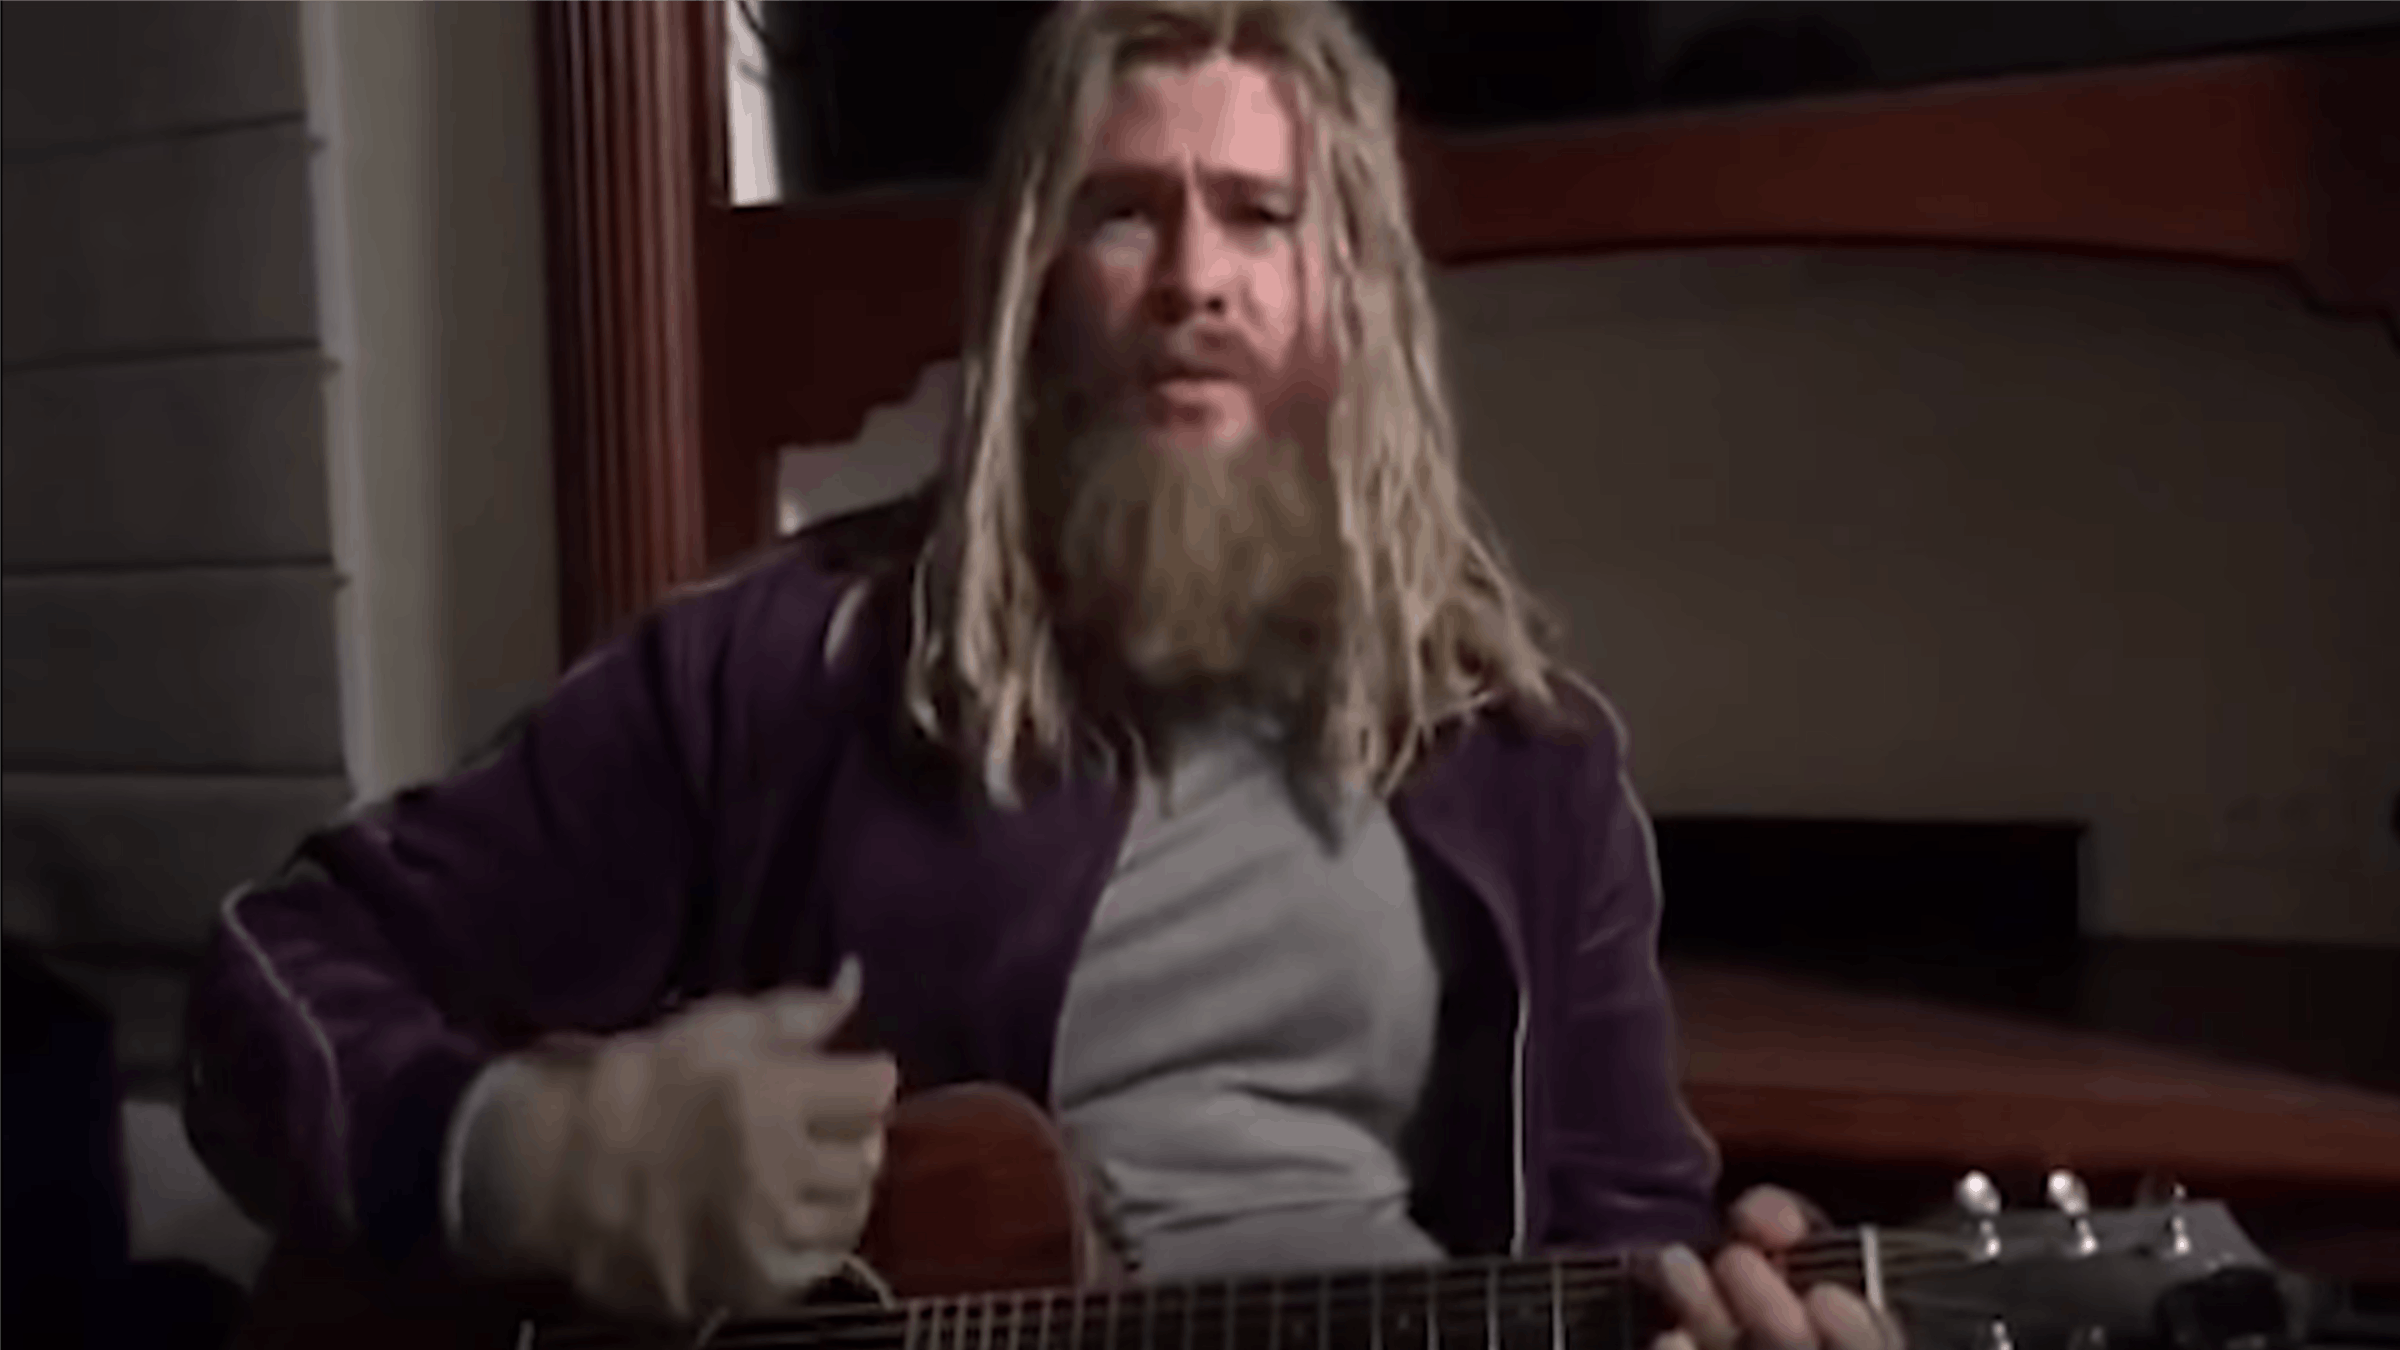 Watch Fat Thor Perform An Acoustic Rendition Of Nine Inch Nails' Hurt On Fallon